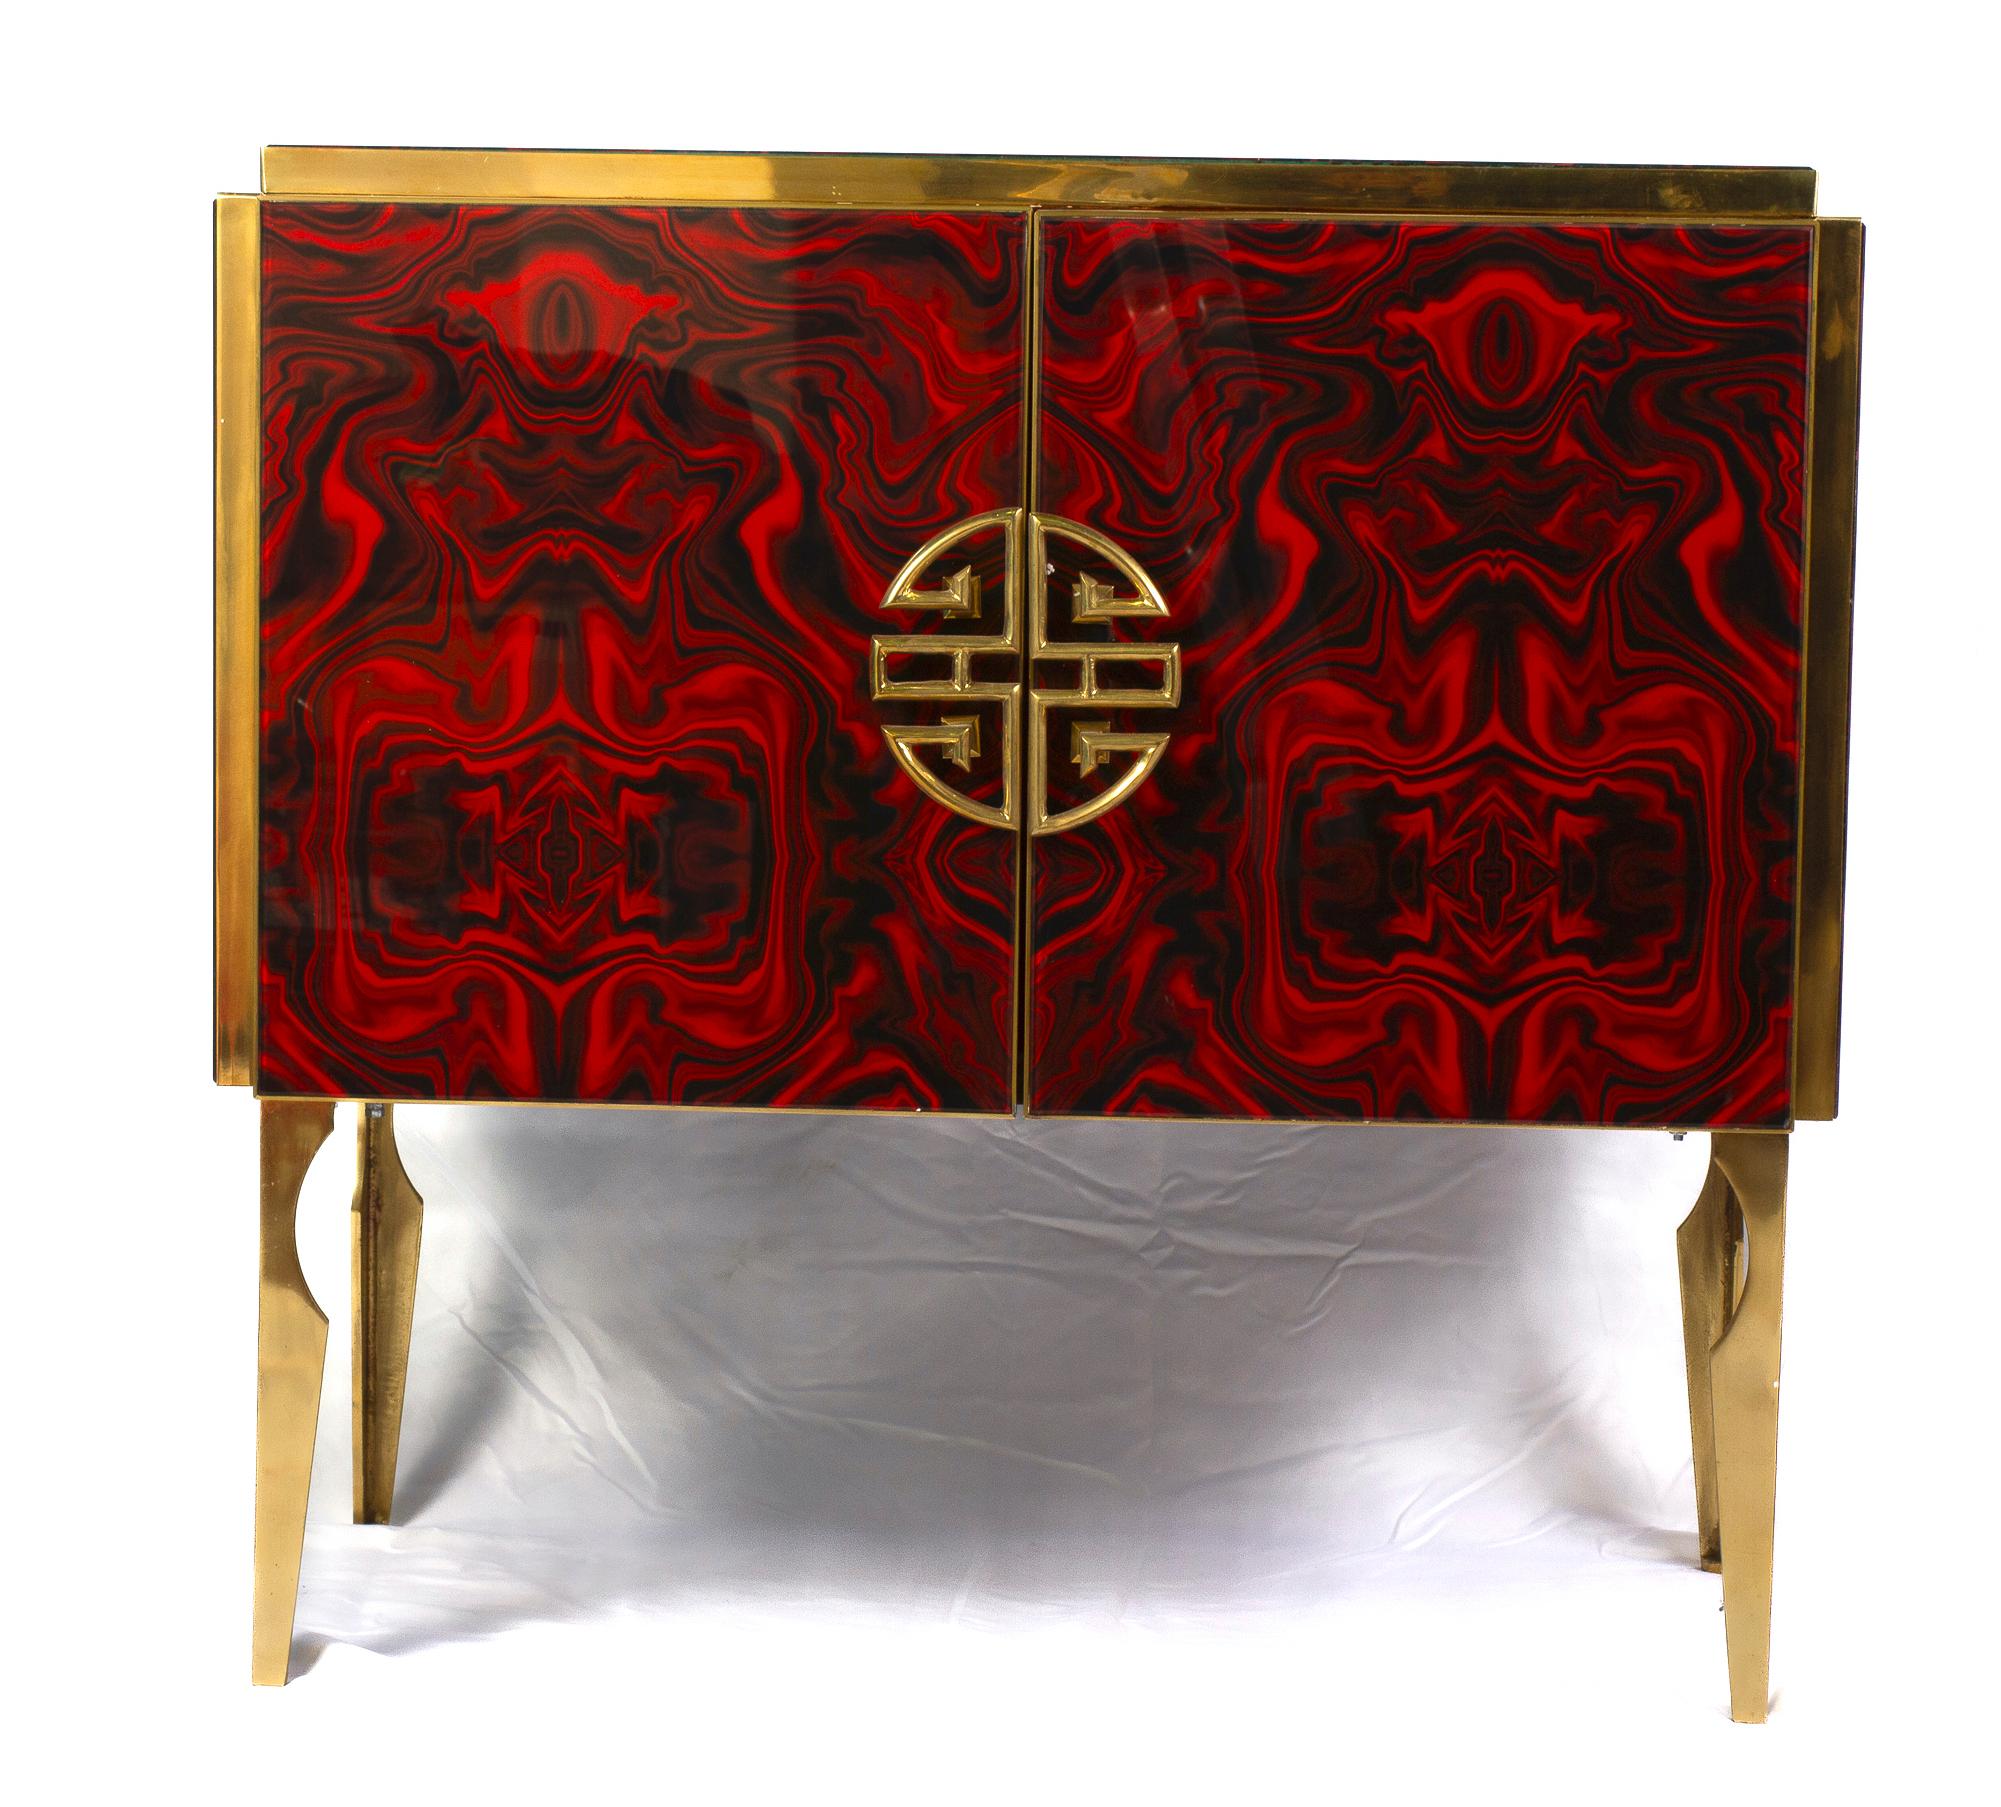 Midcentury Style Brass and Red Fantasy Murano Glass Bar Cabinet, 2020 For Sale 5